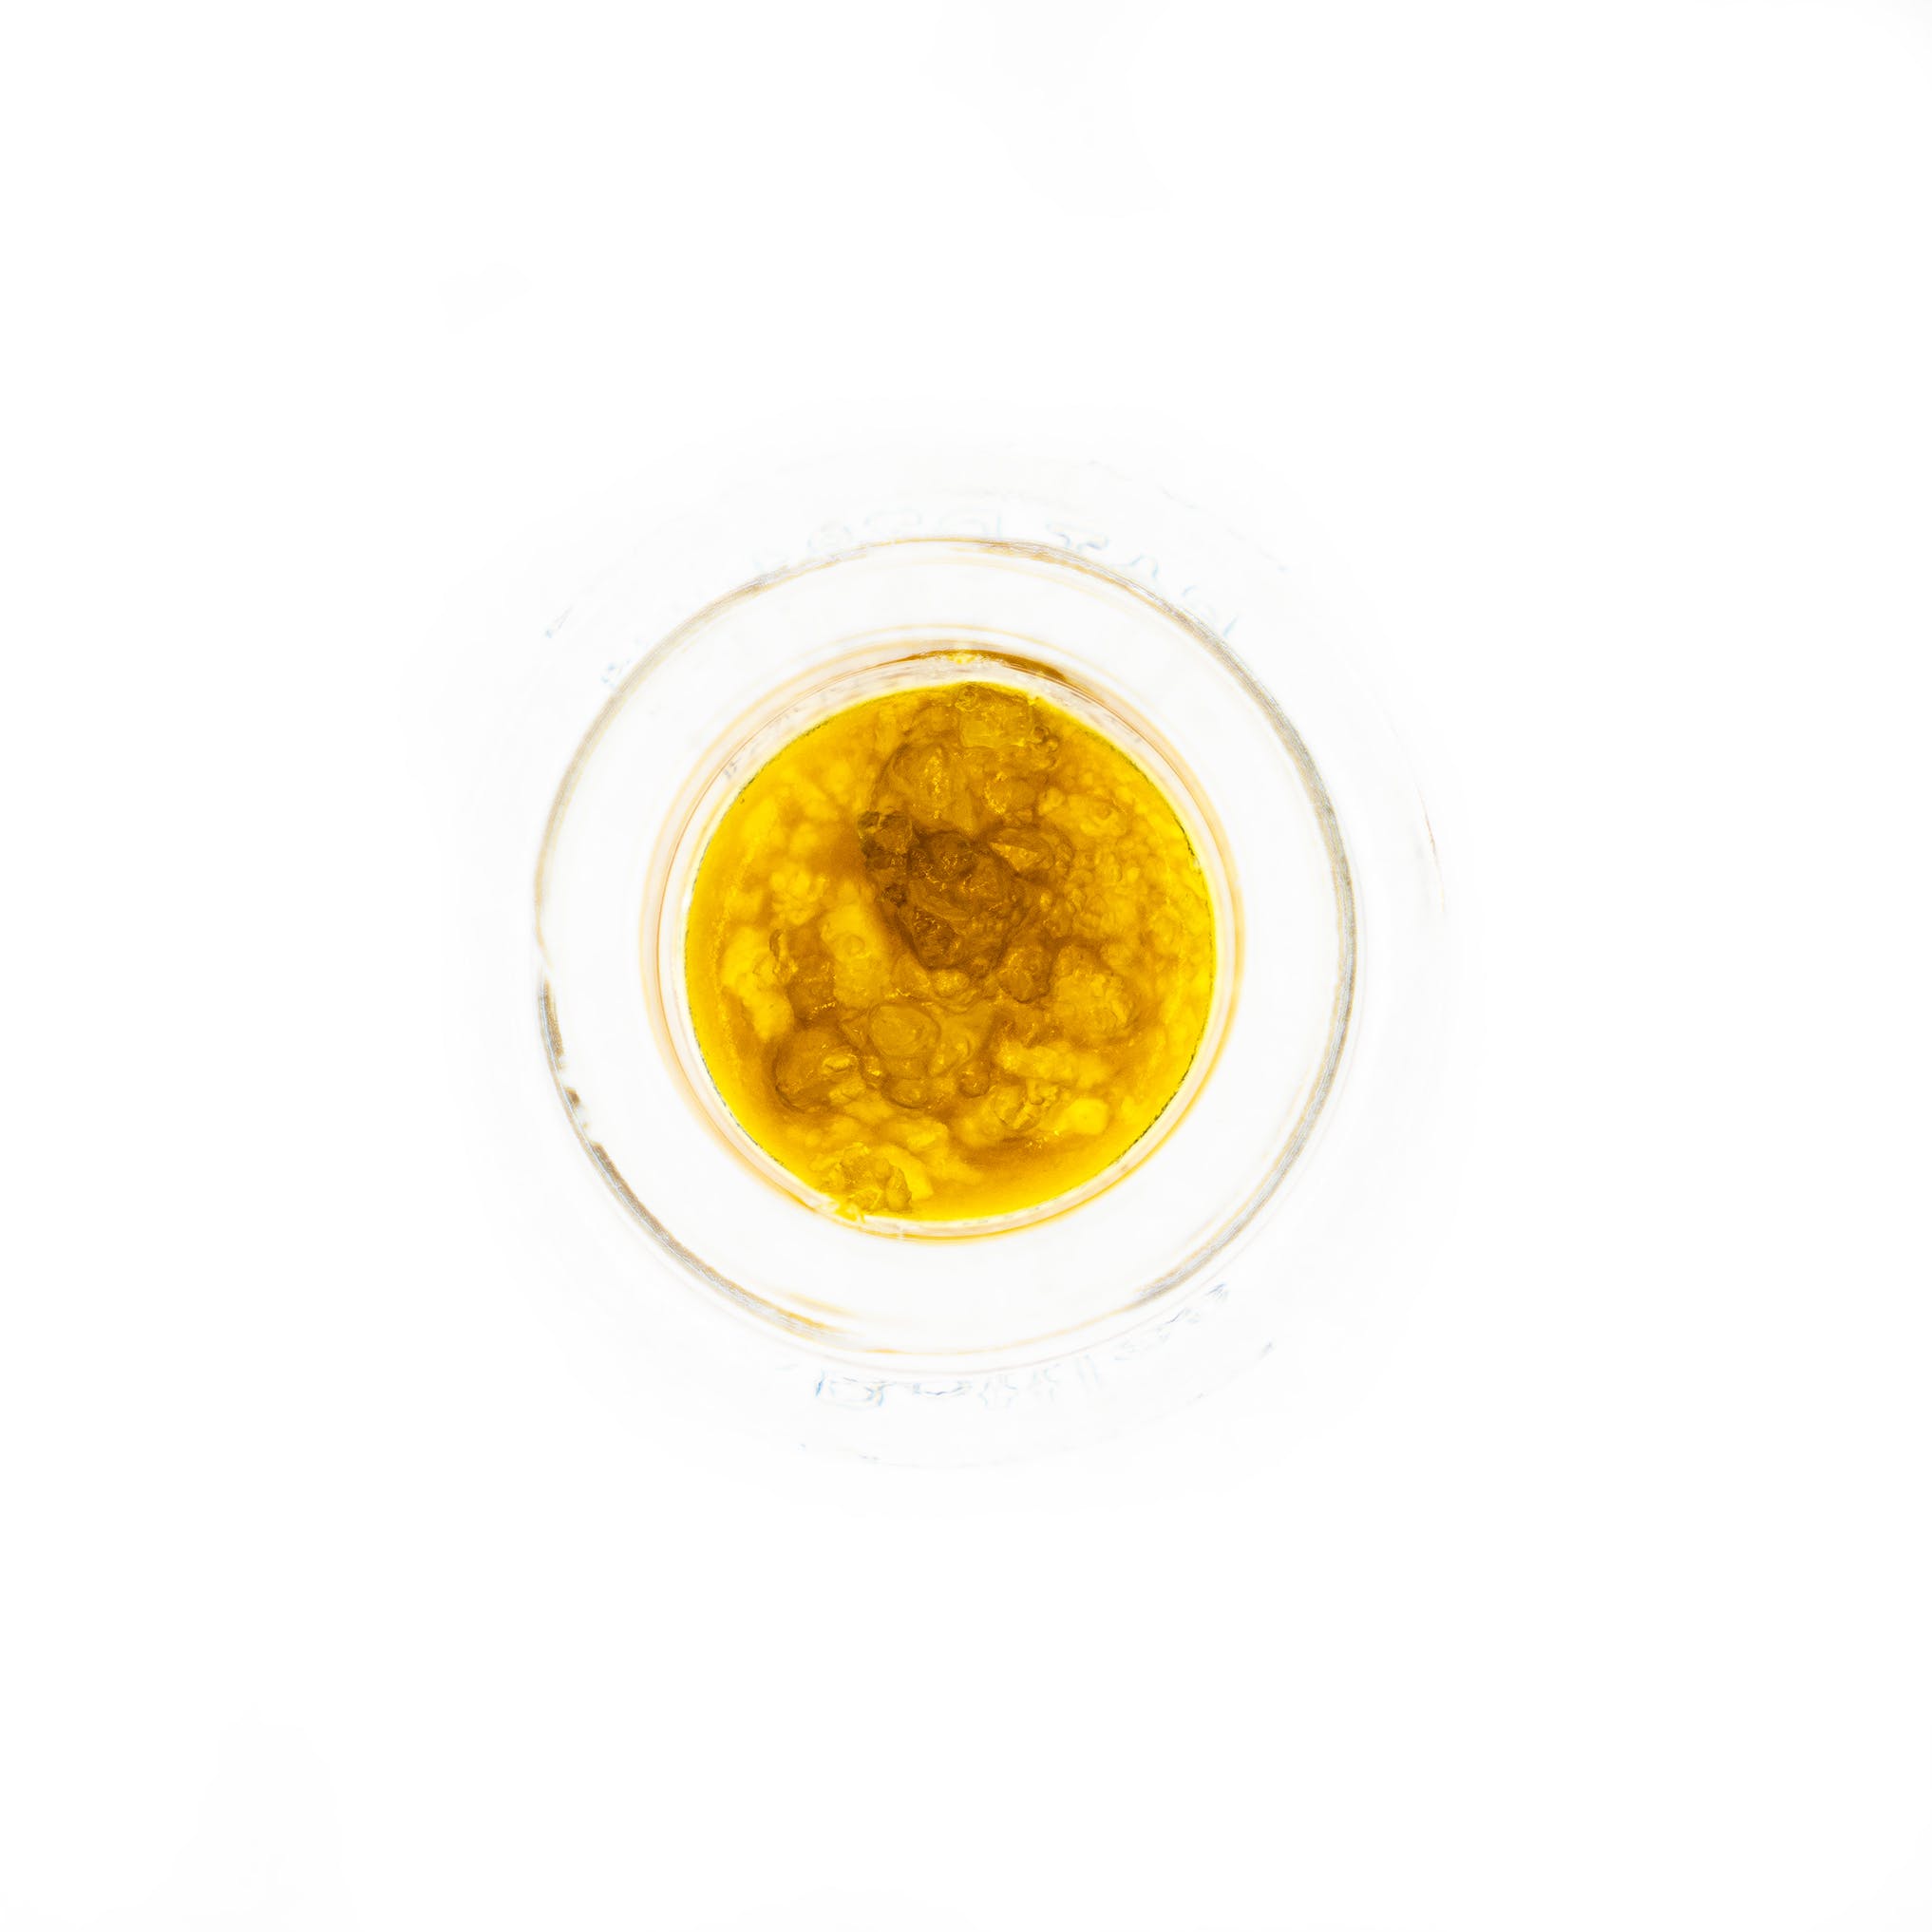 Phyco Dawg Live Resin